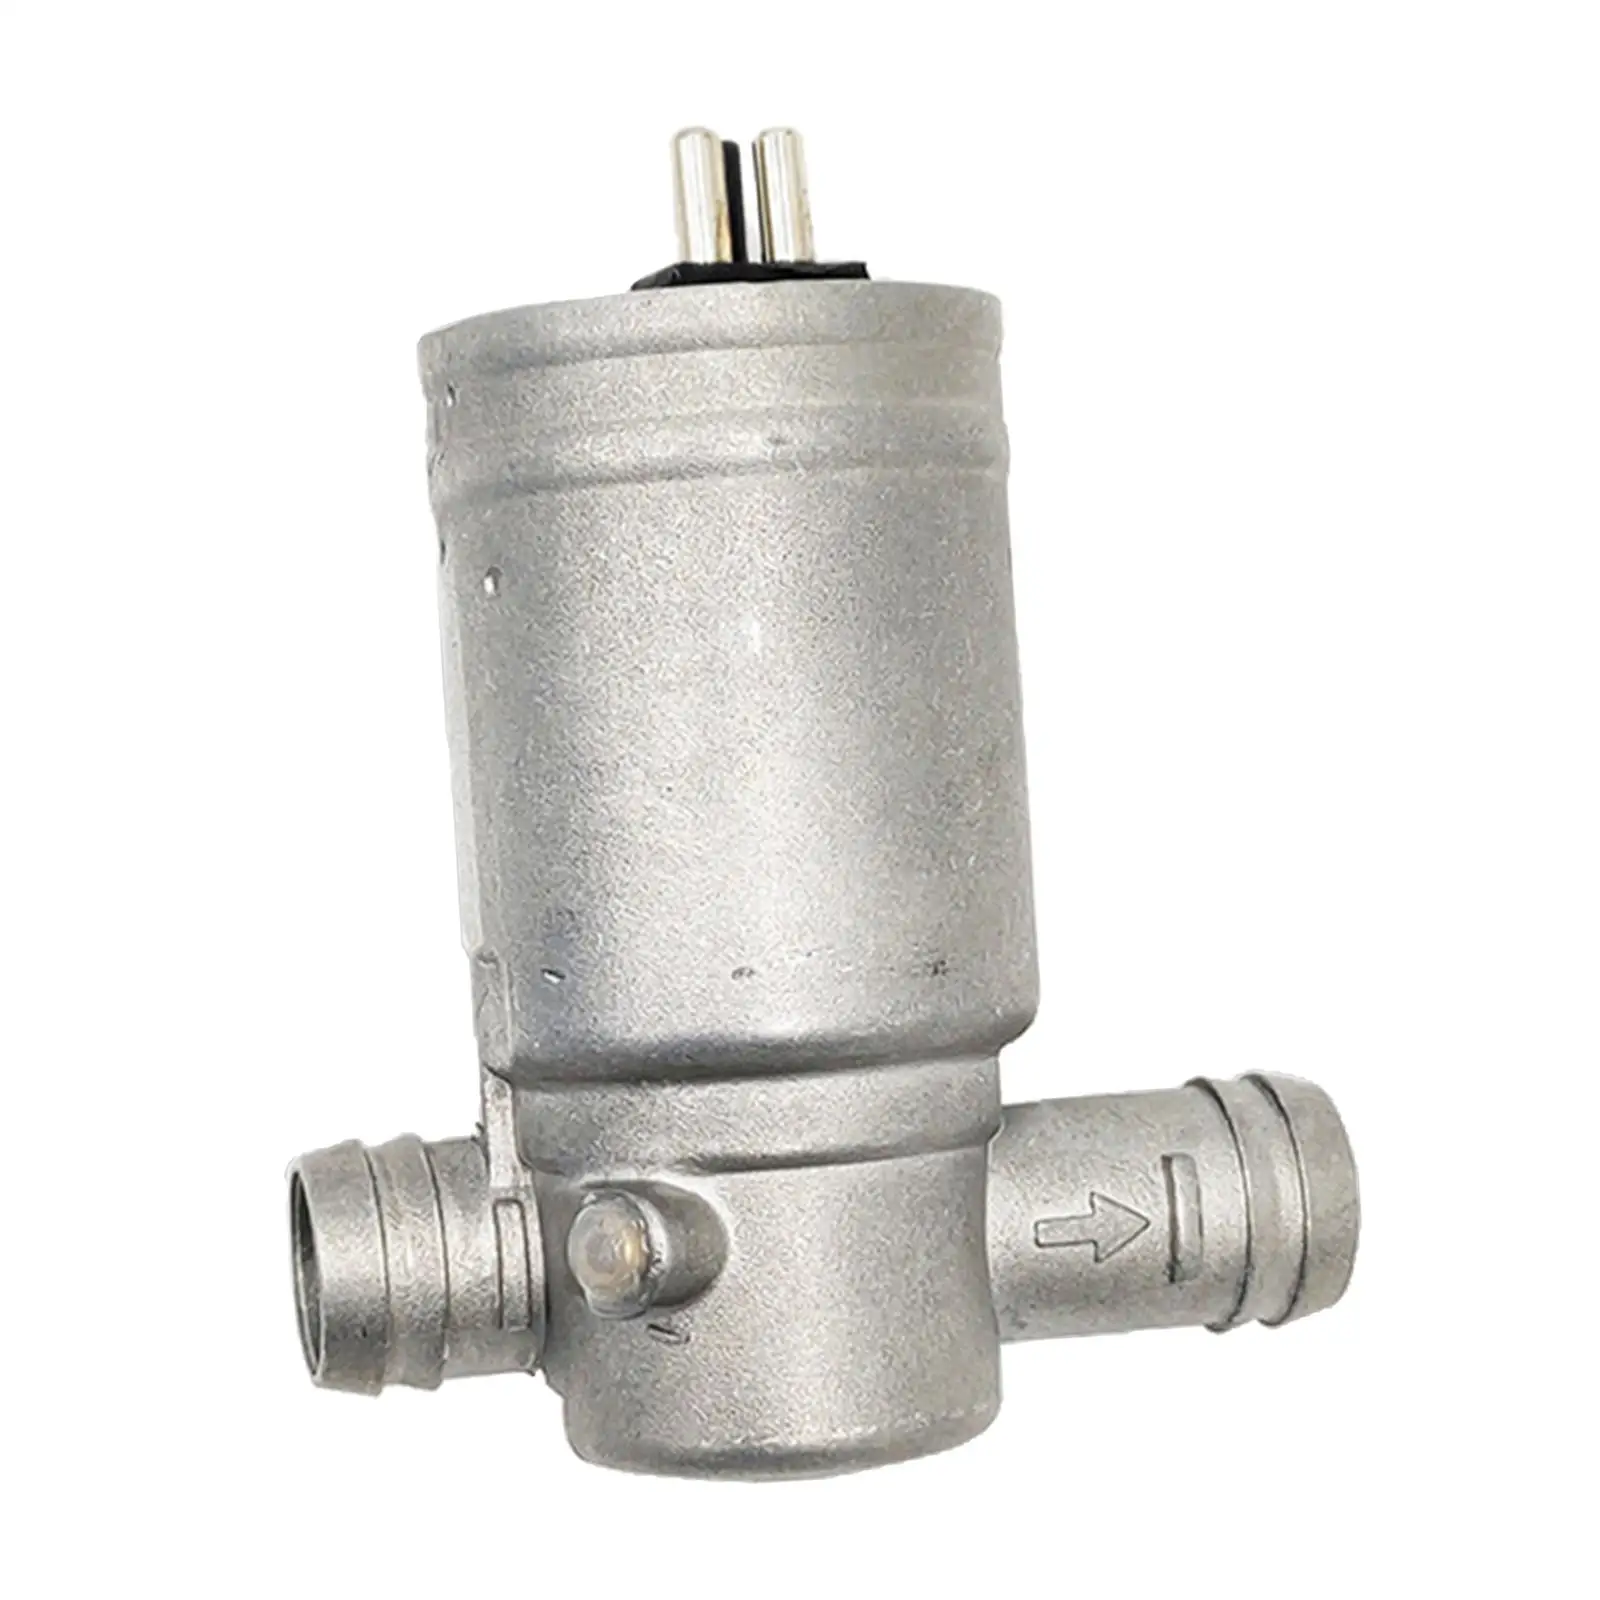 Idle Air Control Valve AC384 1412225 028-014-0510 Fit for 300CE 90-92